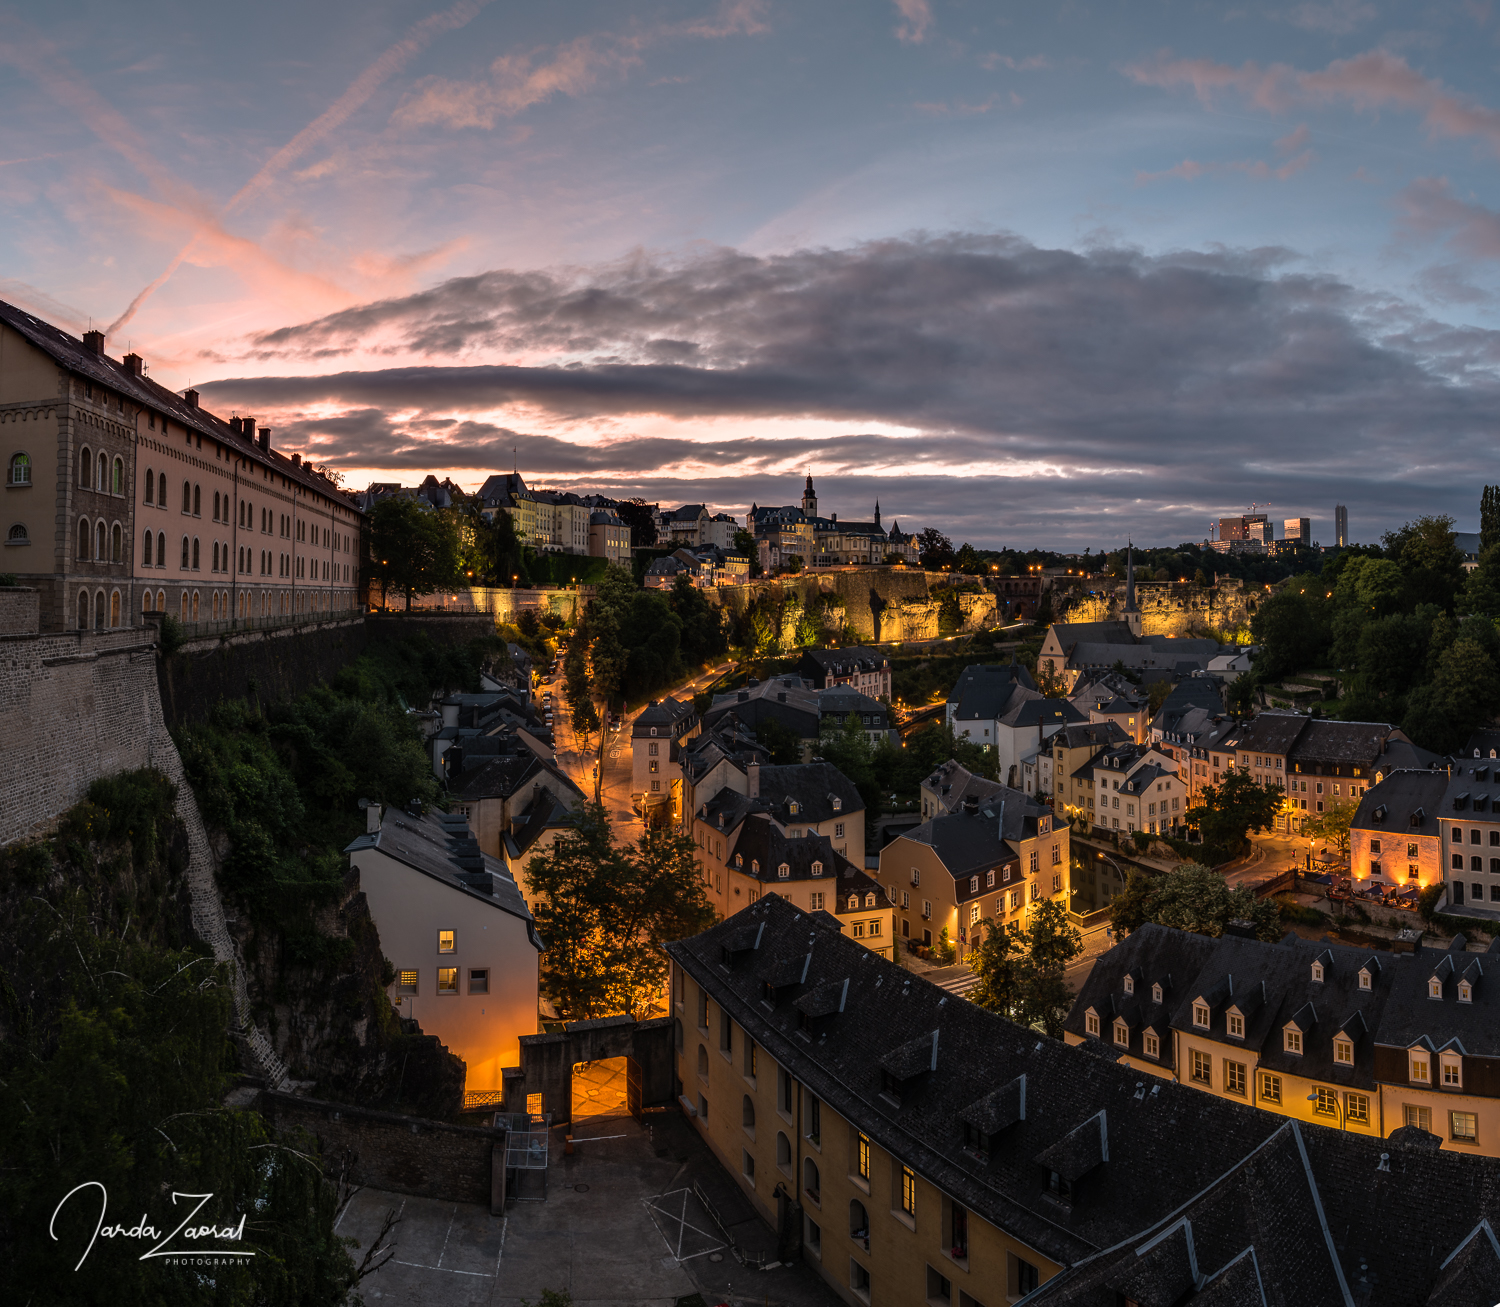 Luxembourg city after sunset